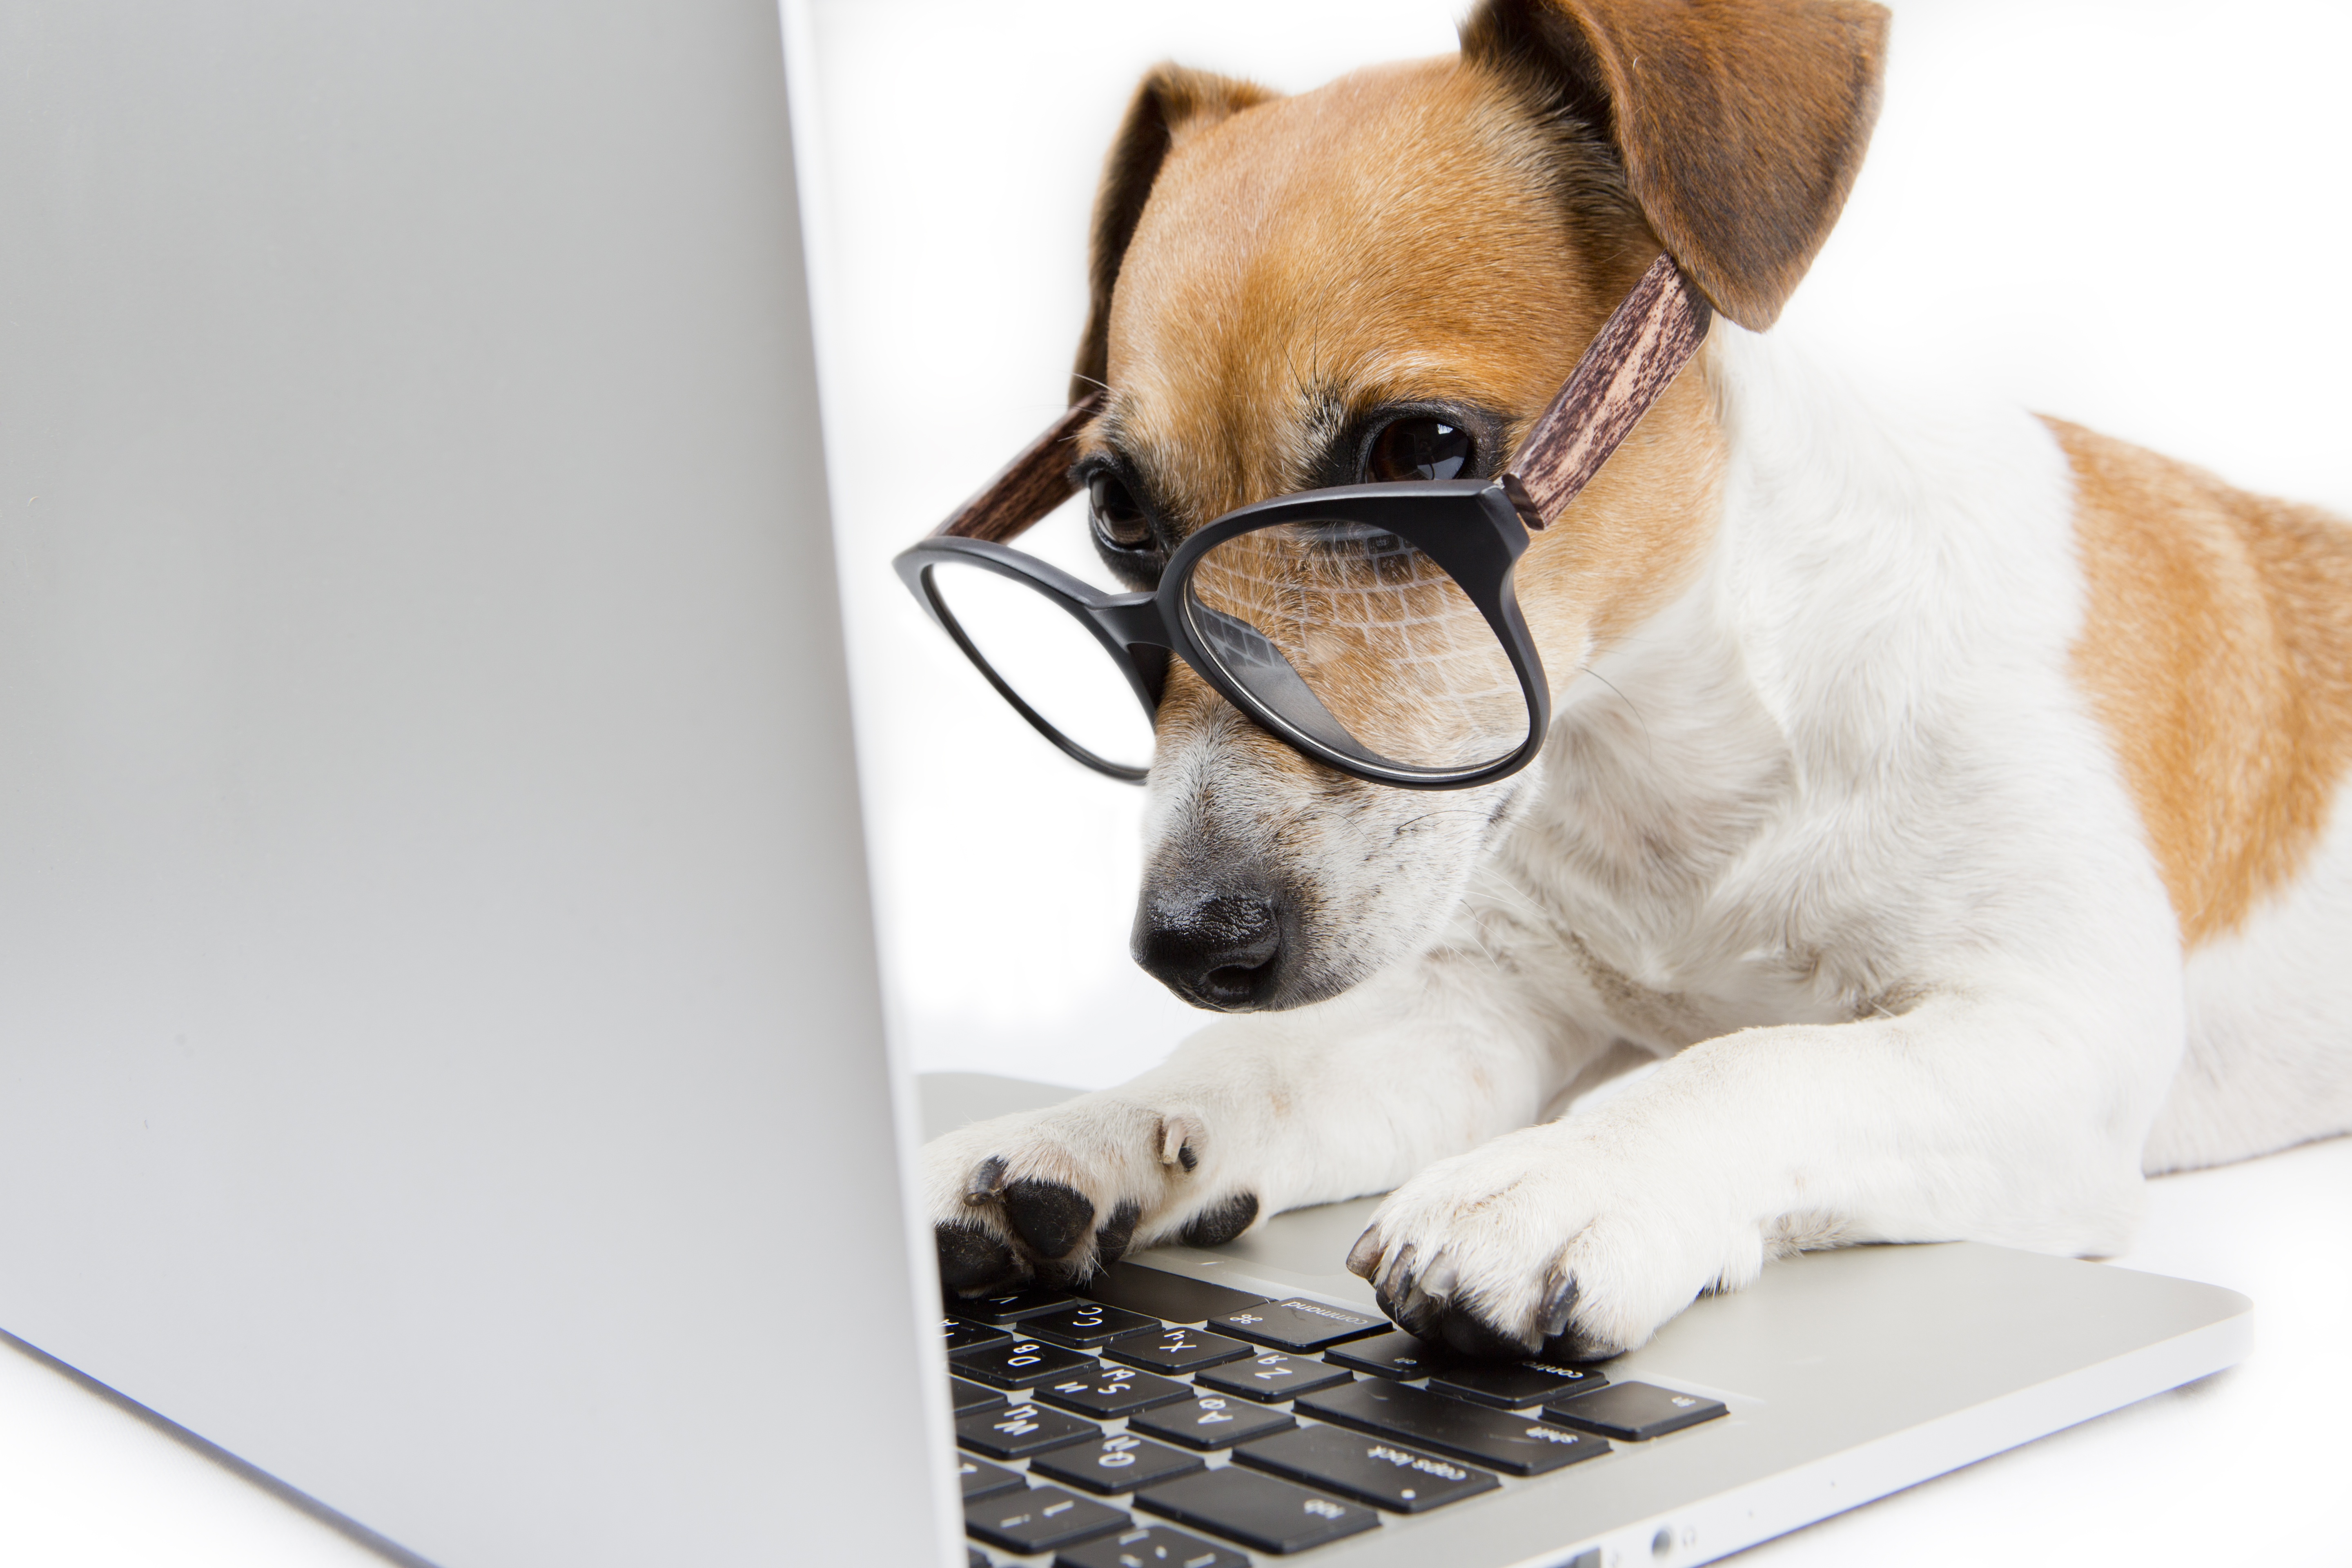 Dog Using The Computer